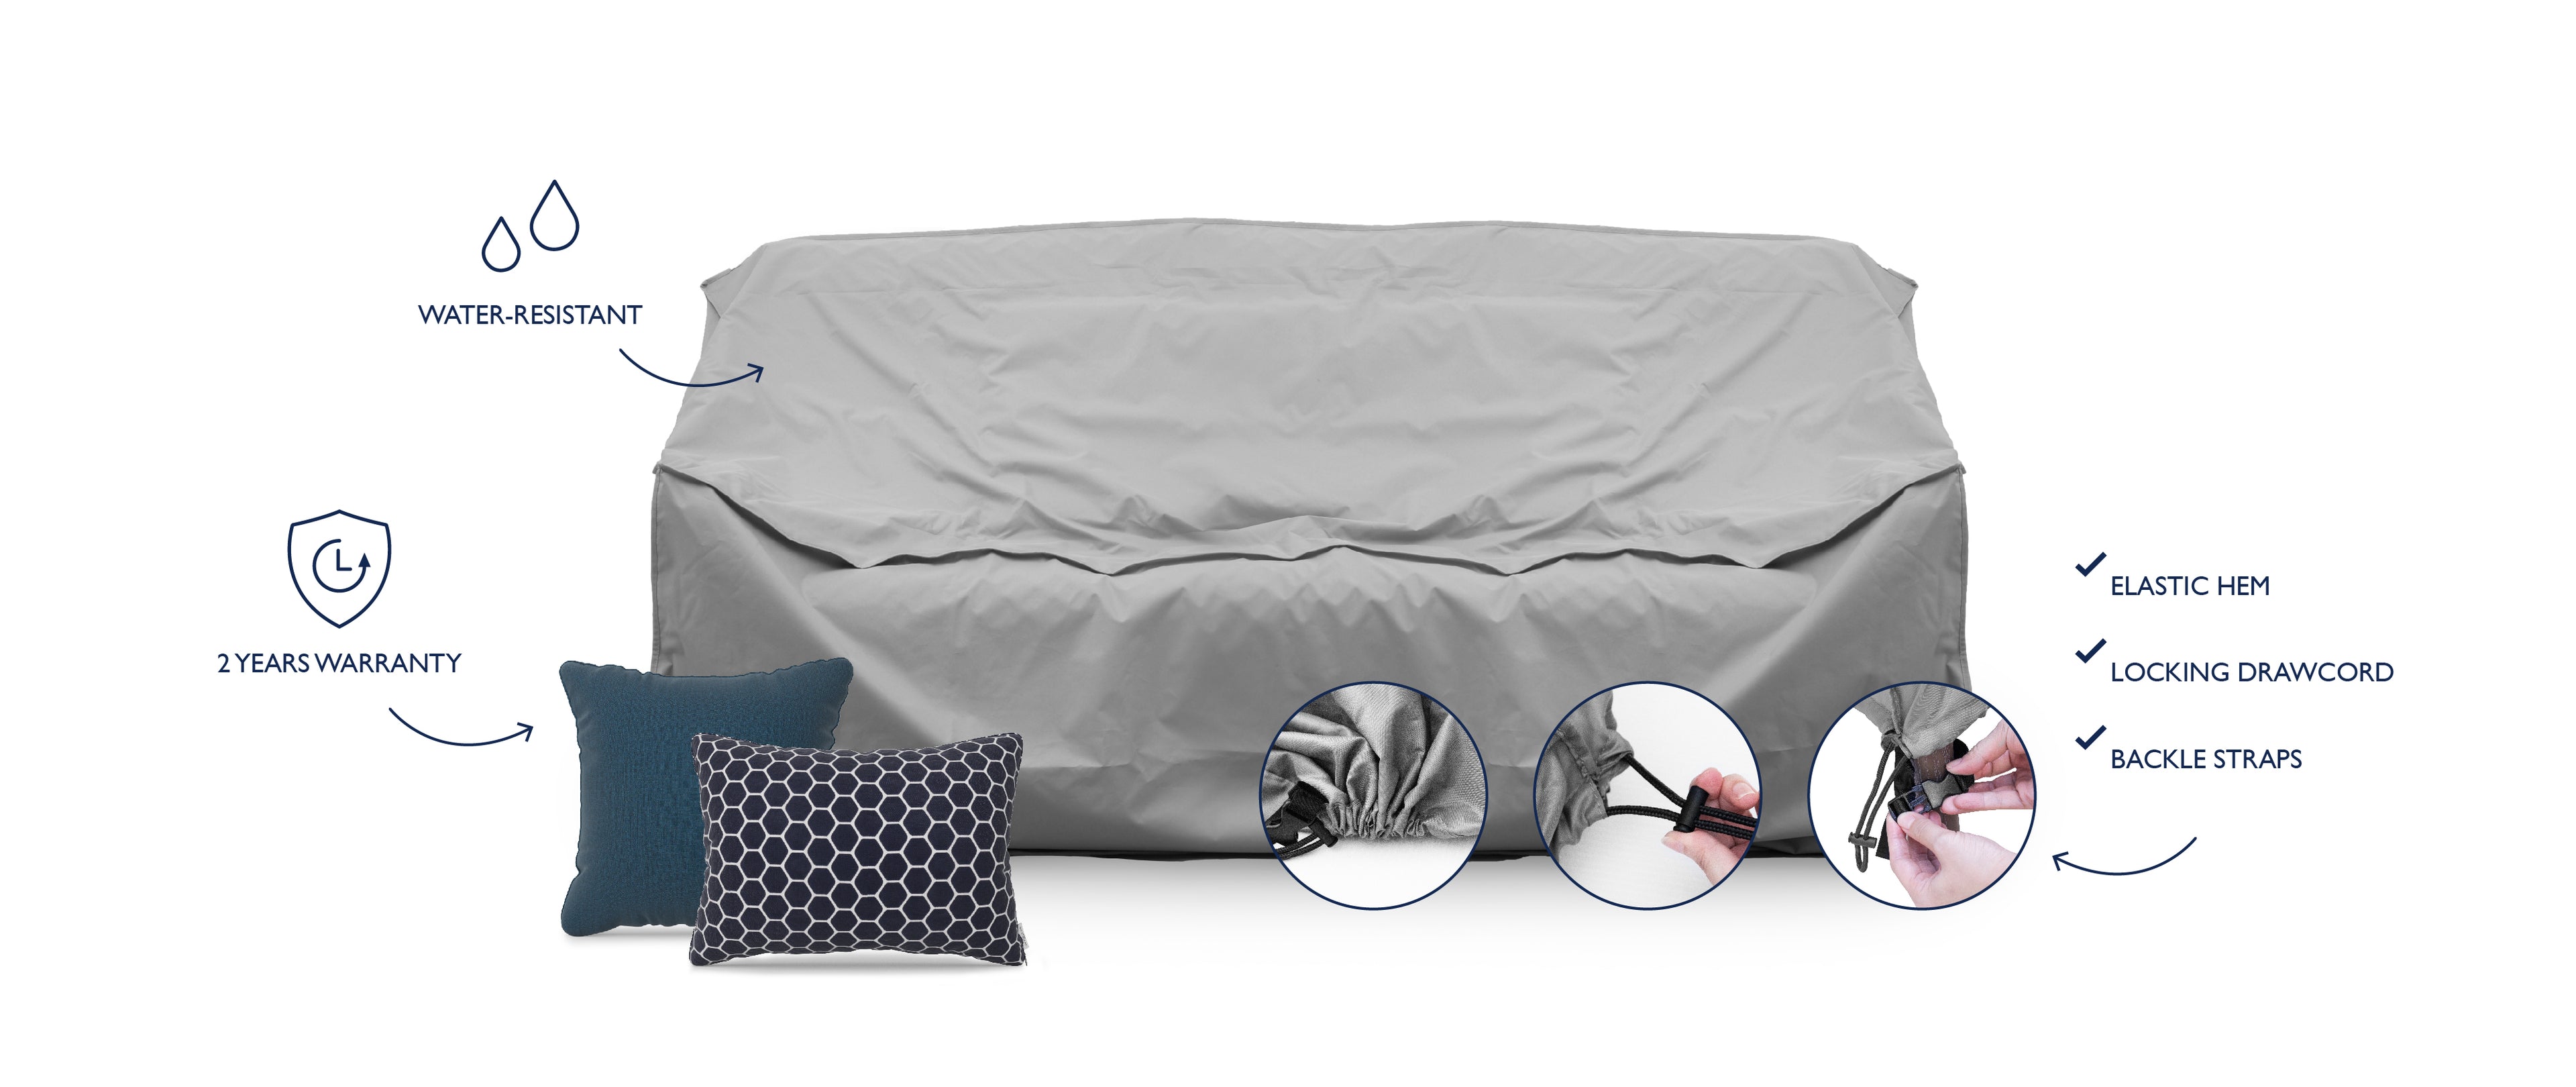 Pillow-to-Cover with cover over an outdoor sofa showcasing different features of the cover.